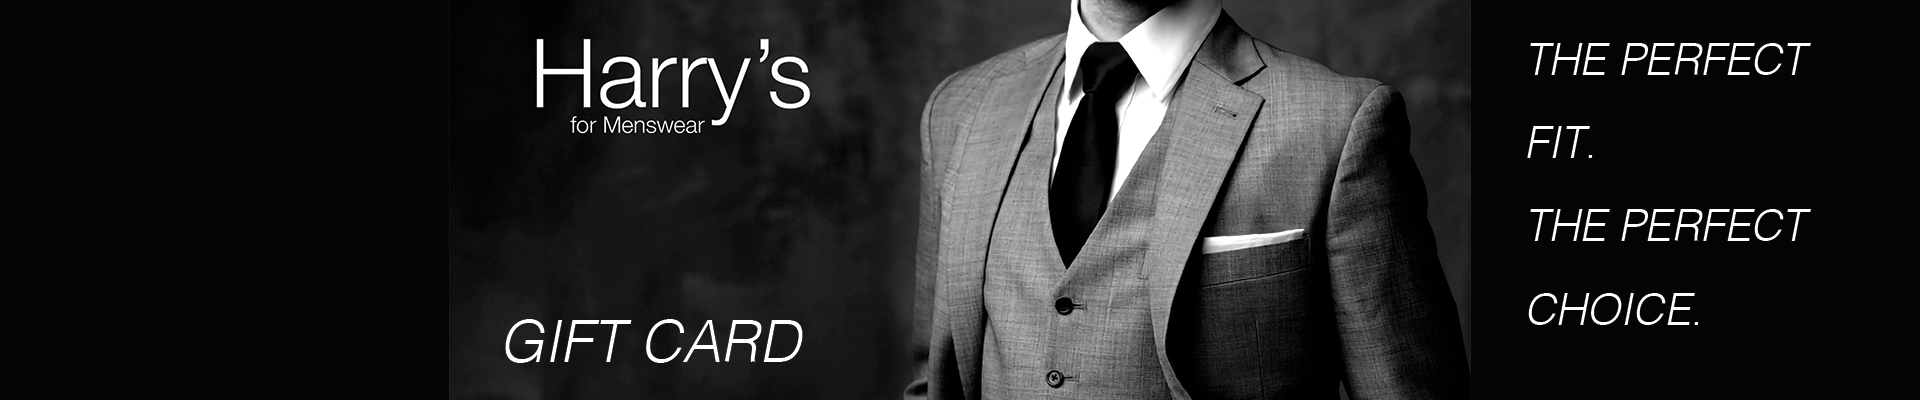 Harry's for Menswear Gift Cards. The Perfect Fit, The Perfect Choice.